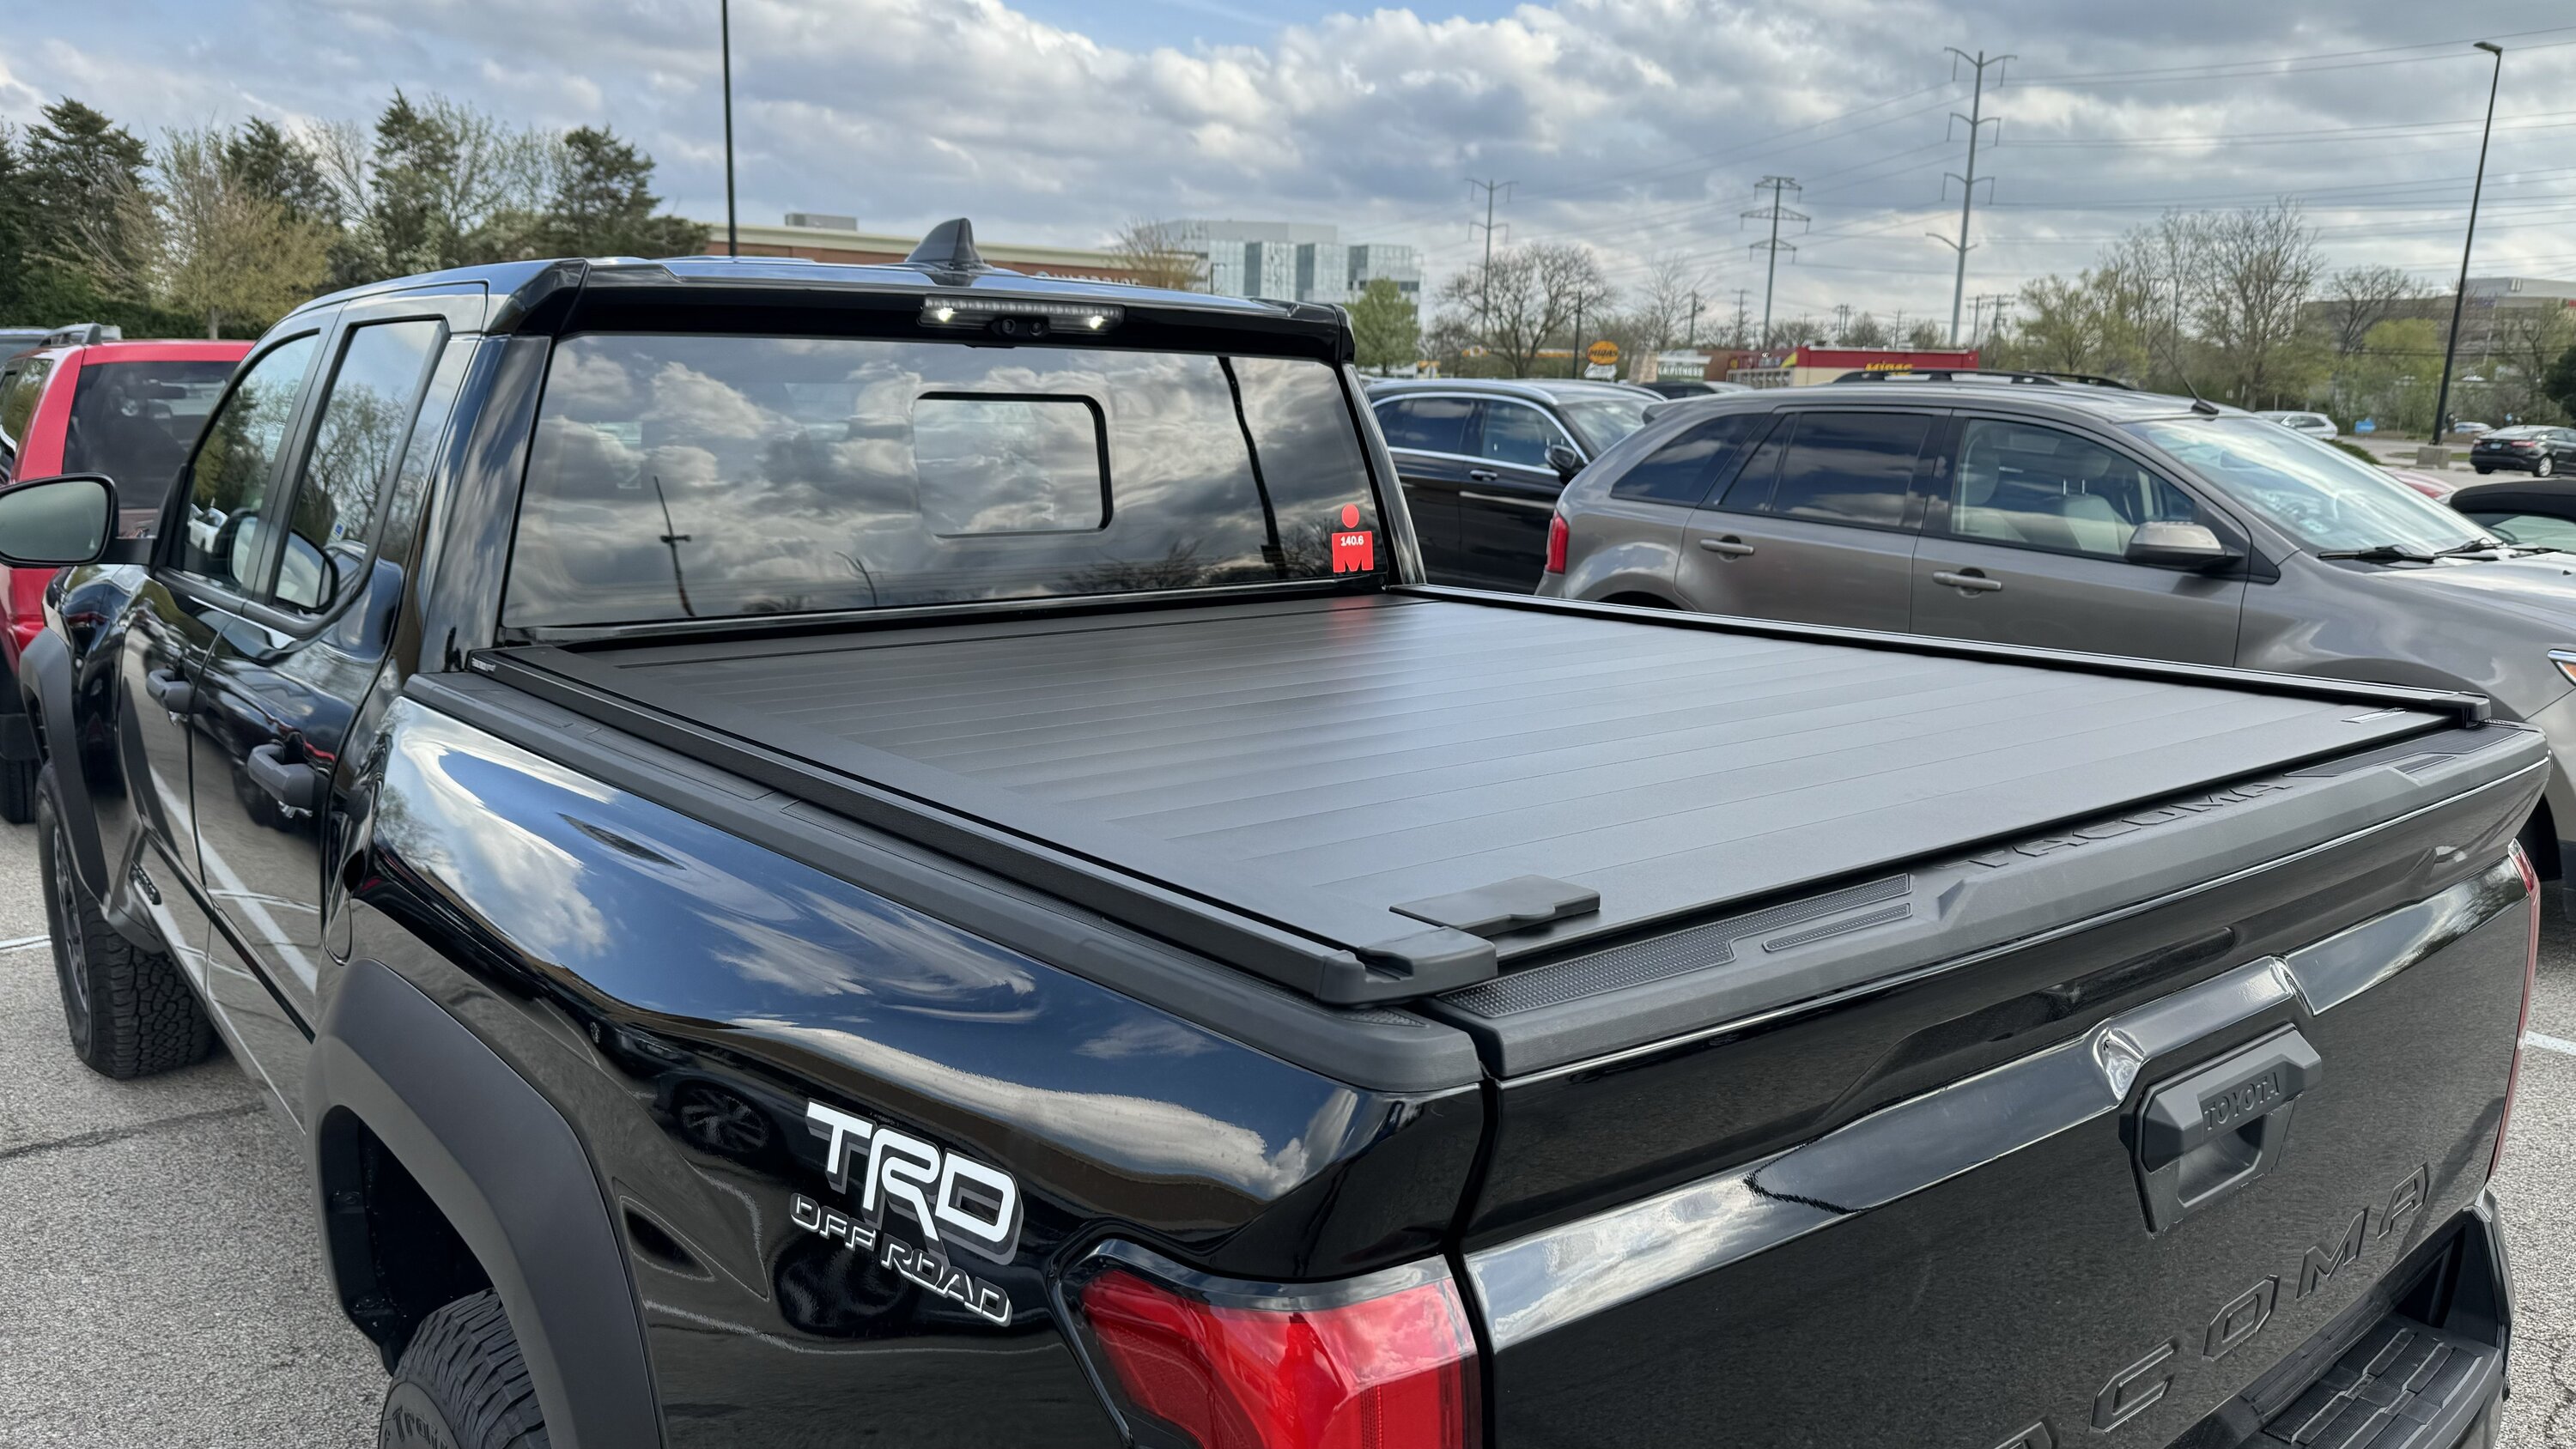 2024 Tacoma Retrax tonneau cover for 2024 Tacoma? Best retractable tonneau cover recommendations? IMG_3846